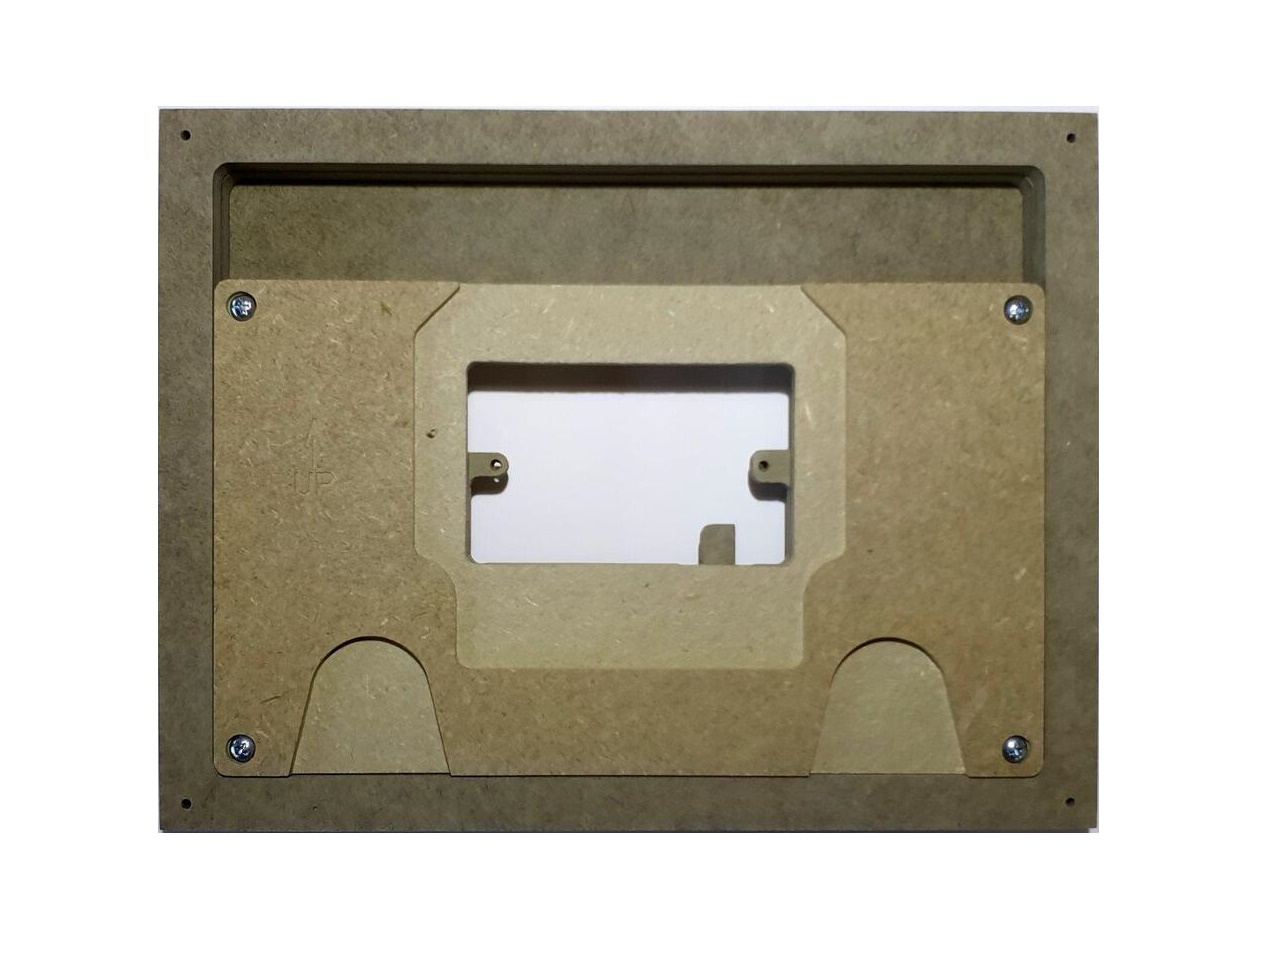 007-1-849 Solid Surface Mount for C4-T4IW10 by Wall-Smart